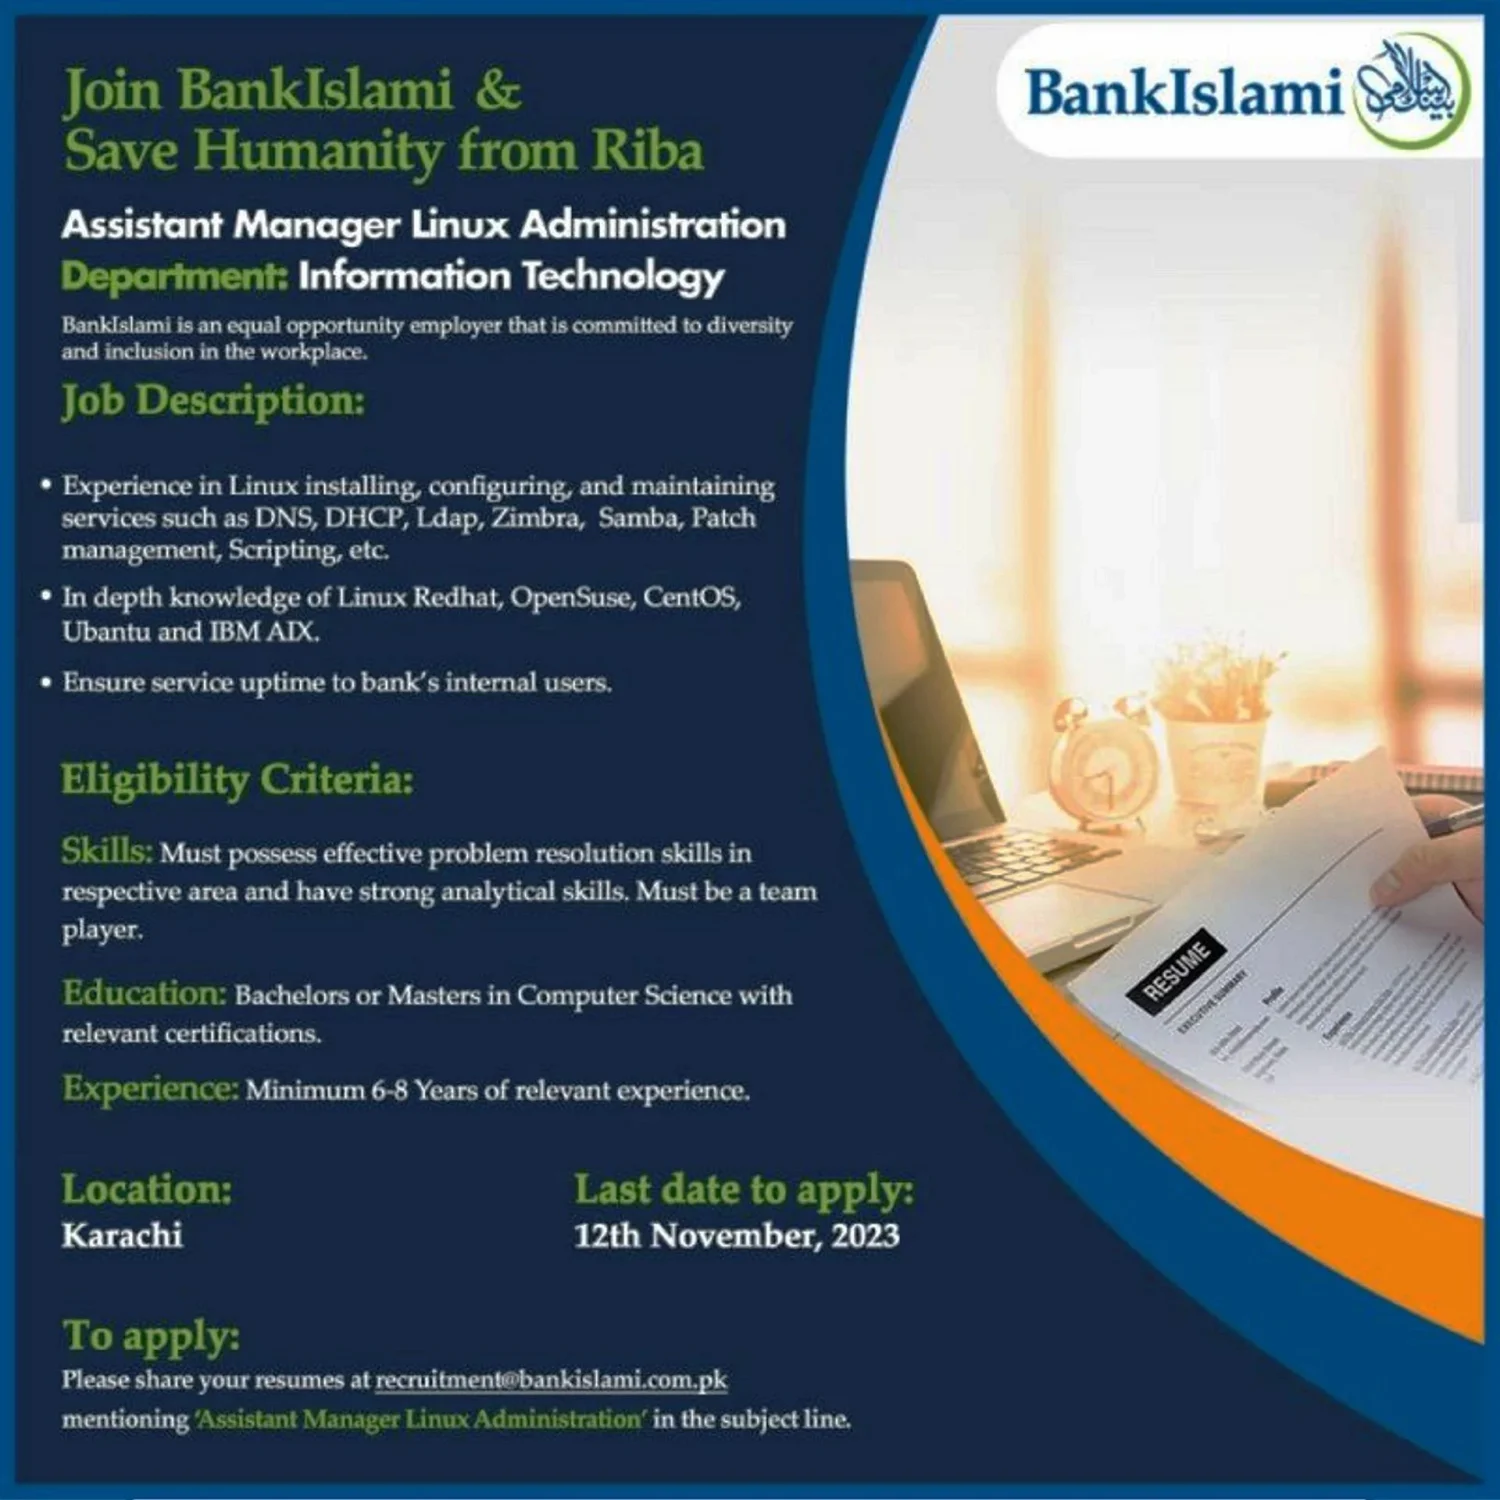 BankIslami and Be a Part of the Solution